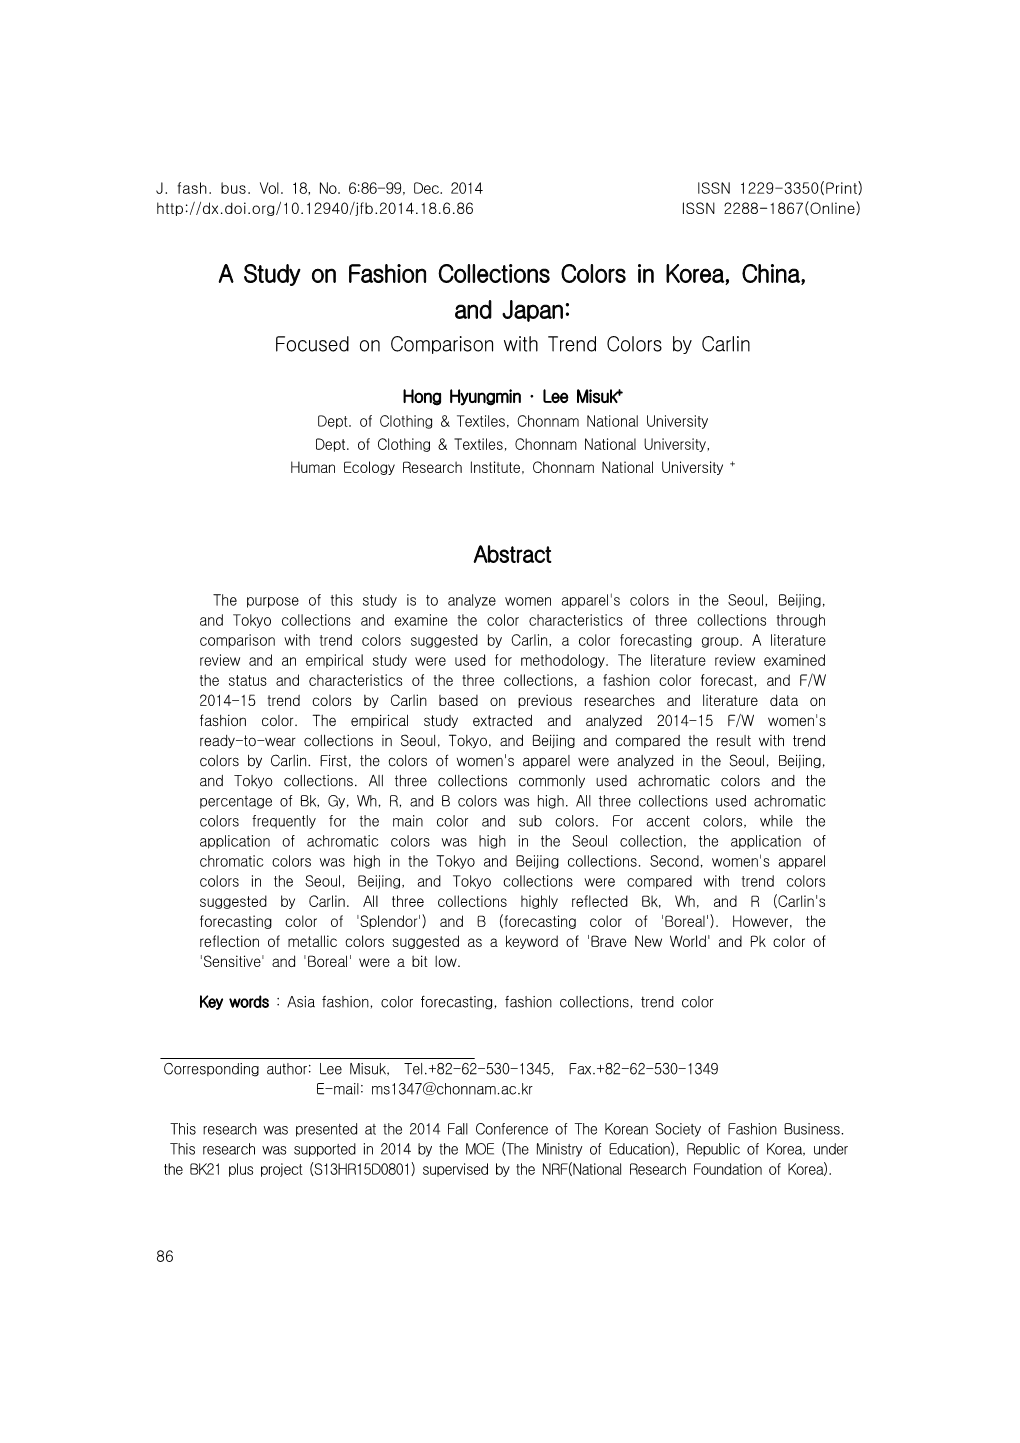 A Study on Fashion Collections Colors in Korea, China, and Japan: Focused on Comparison with Trend Colors by Carlin